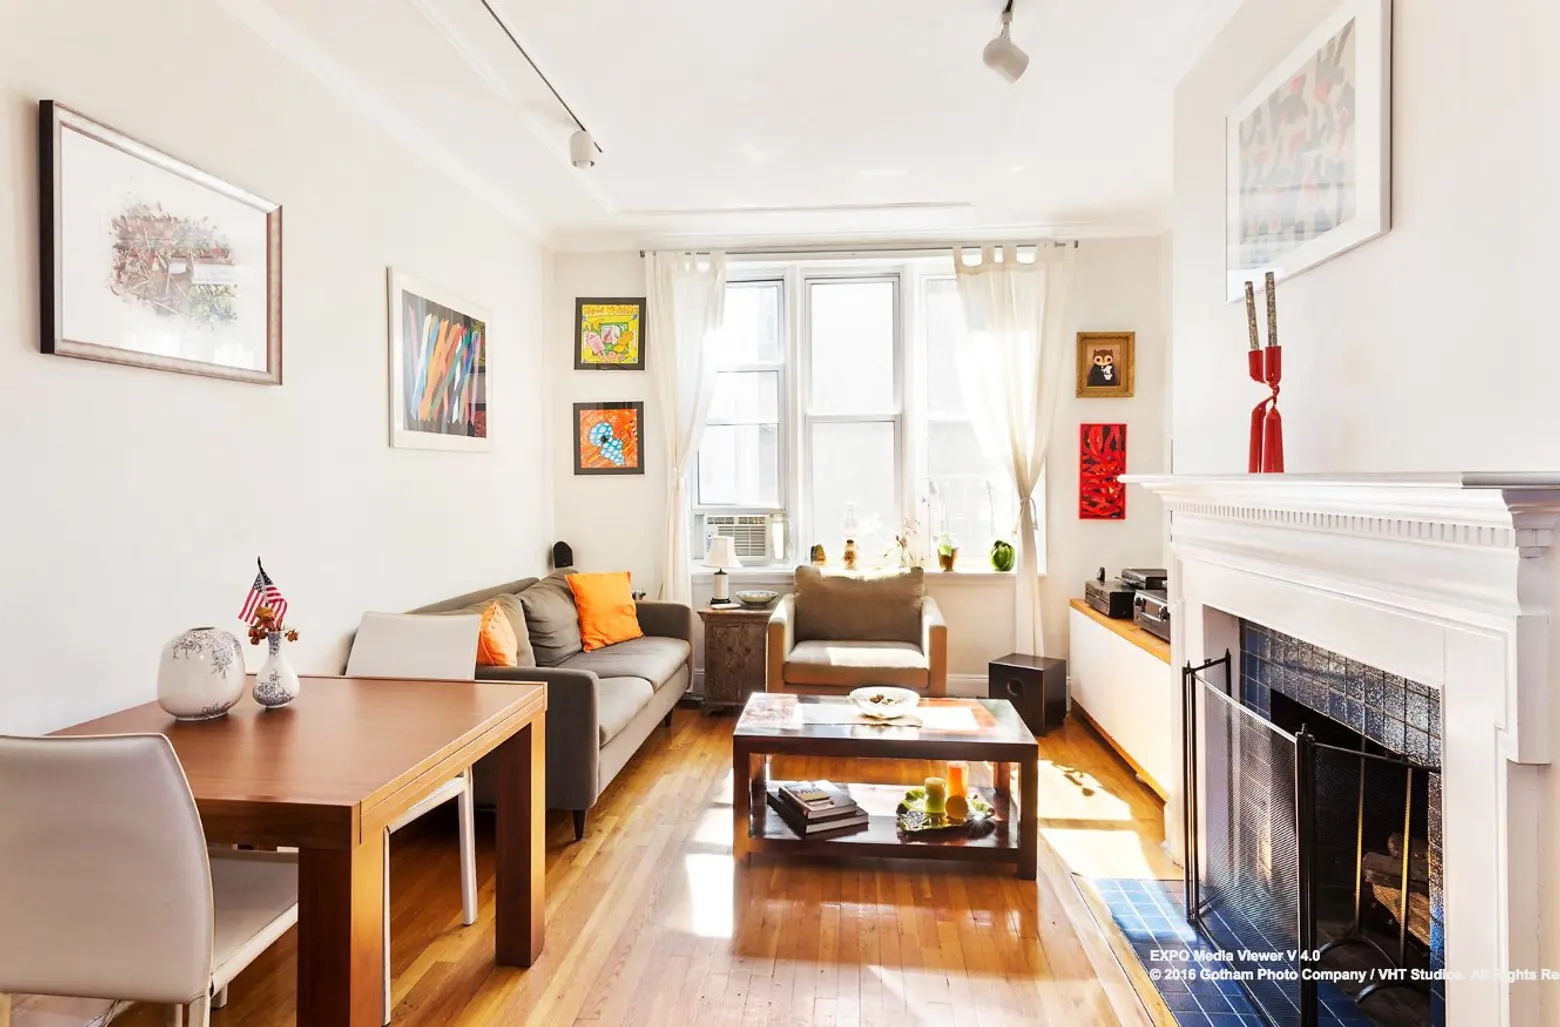 Cozy Park Slope duplex comes with a sunny garden and wood-burning fireplace, all for $780K